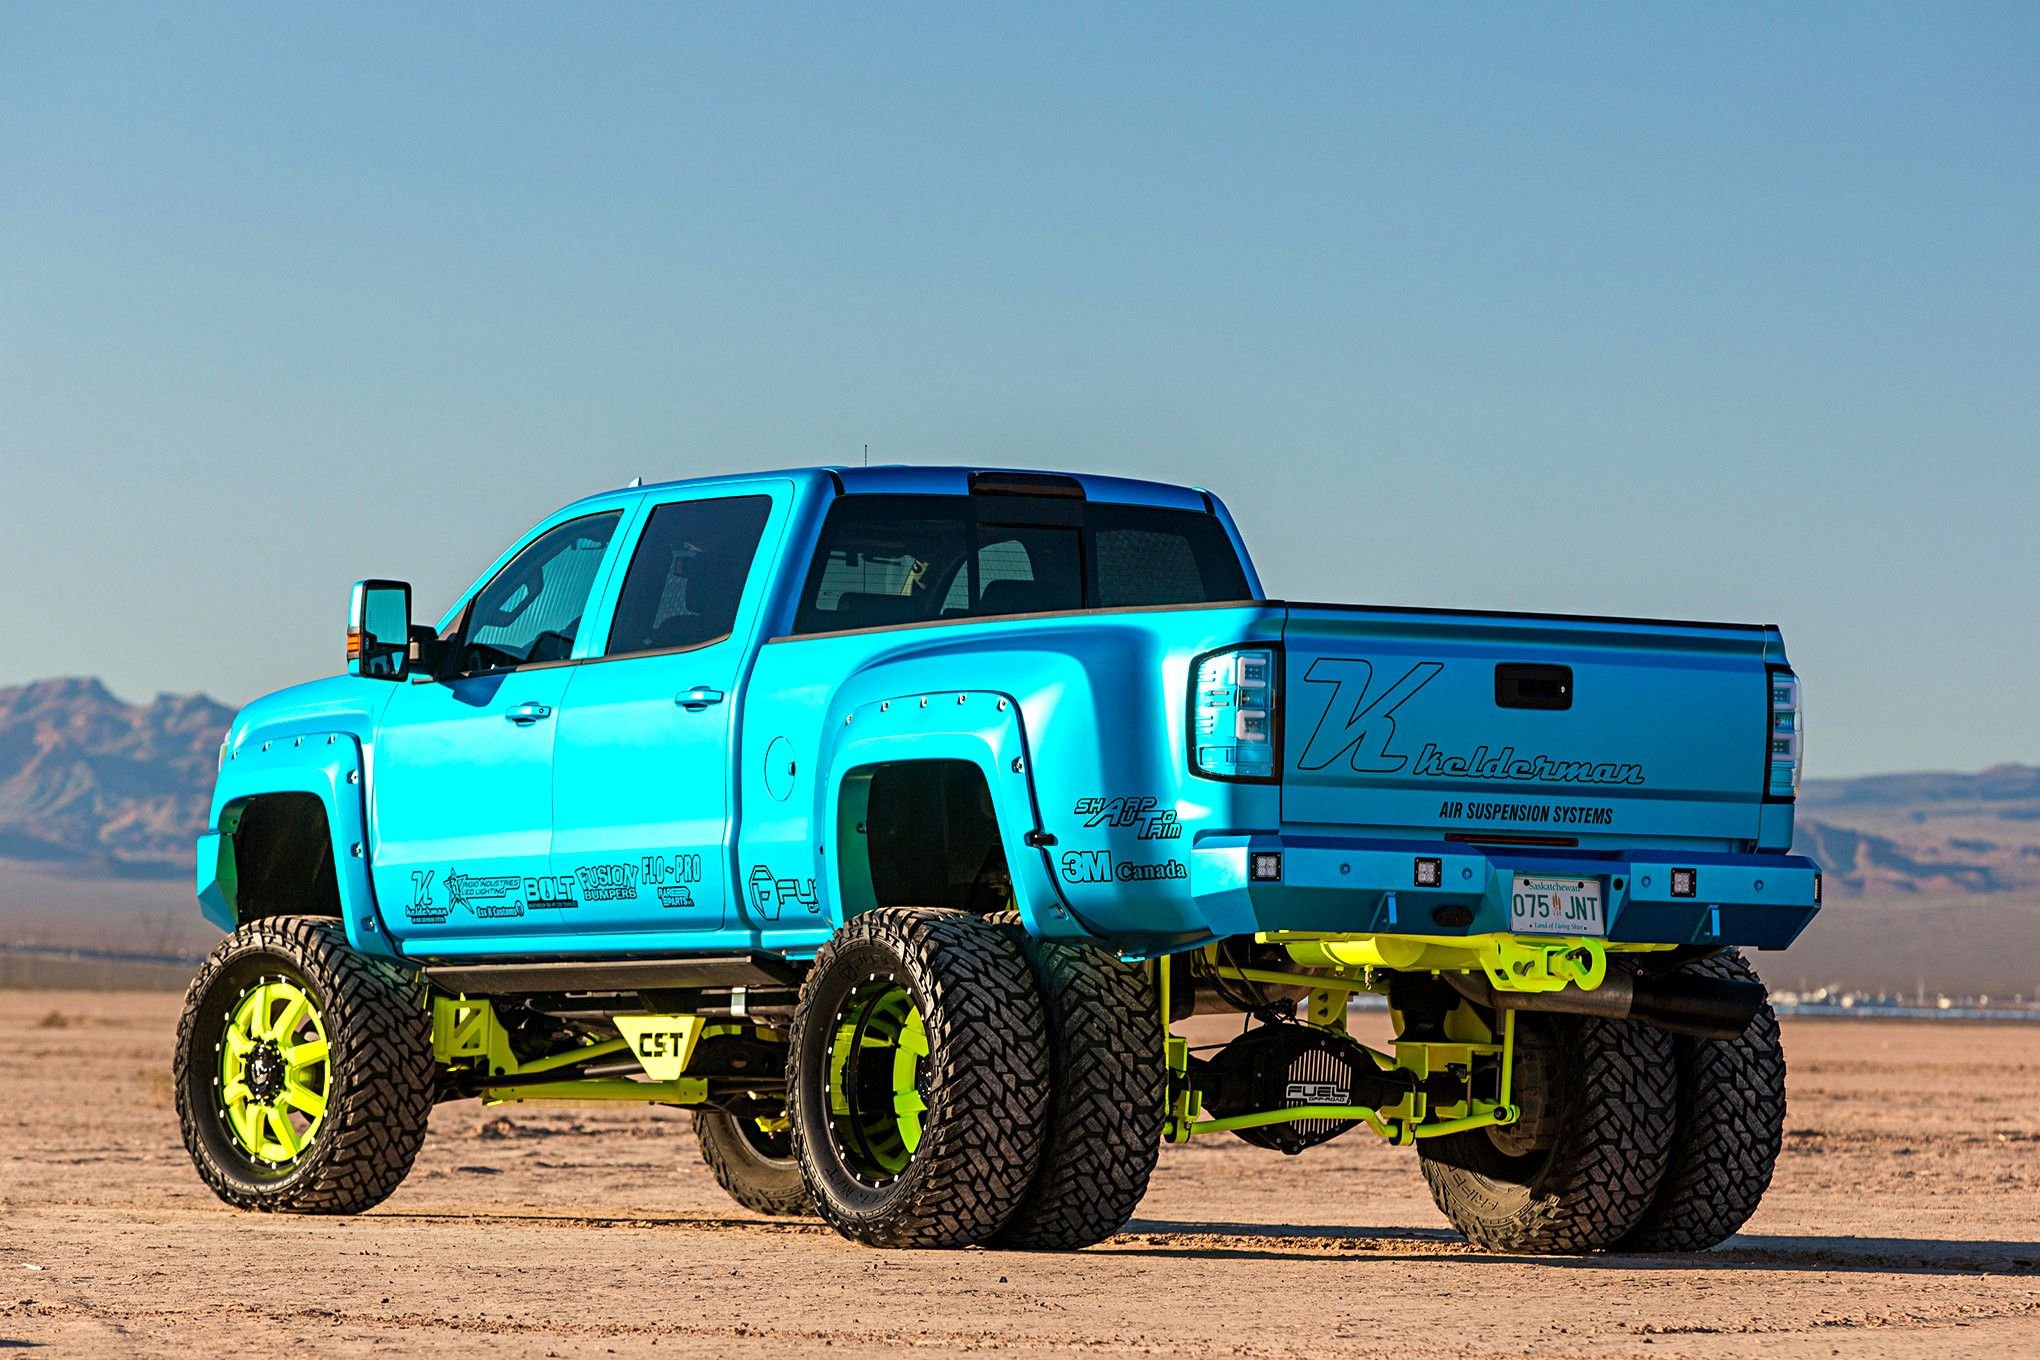 GMC Sierra with candy blue custom paint and neon green CST lift kit - Photo by Cody Gephart (Trucktrend)